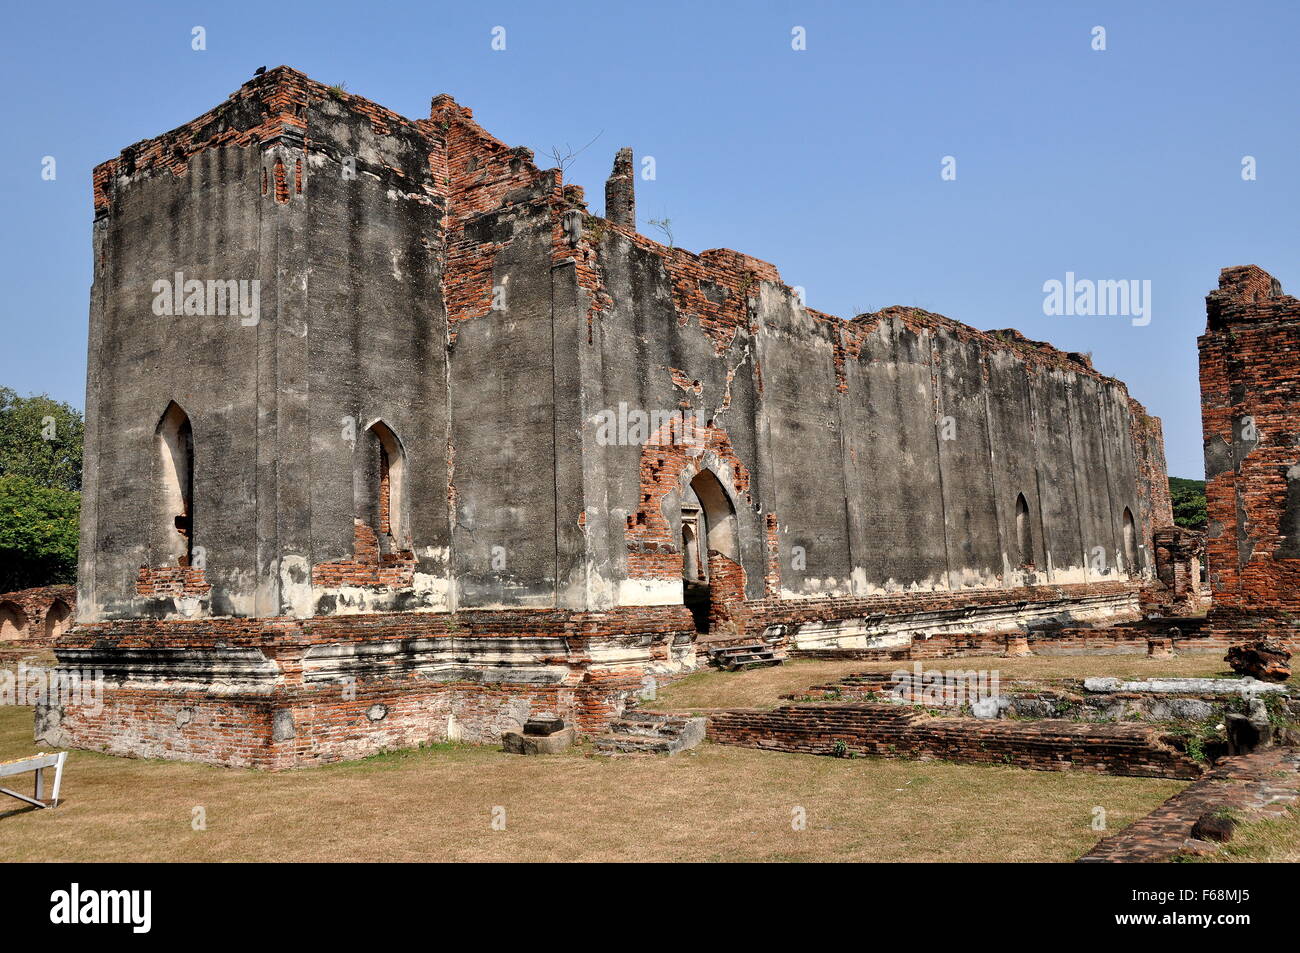 Lopburi, Thailand::  Ruins of a vast temple pavilion with arched doorways at Wat Phra Sri Rattana Mahathat Stock Photo